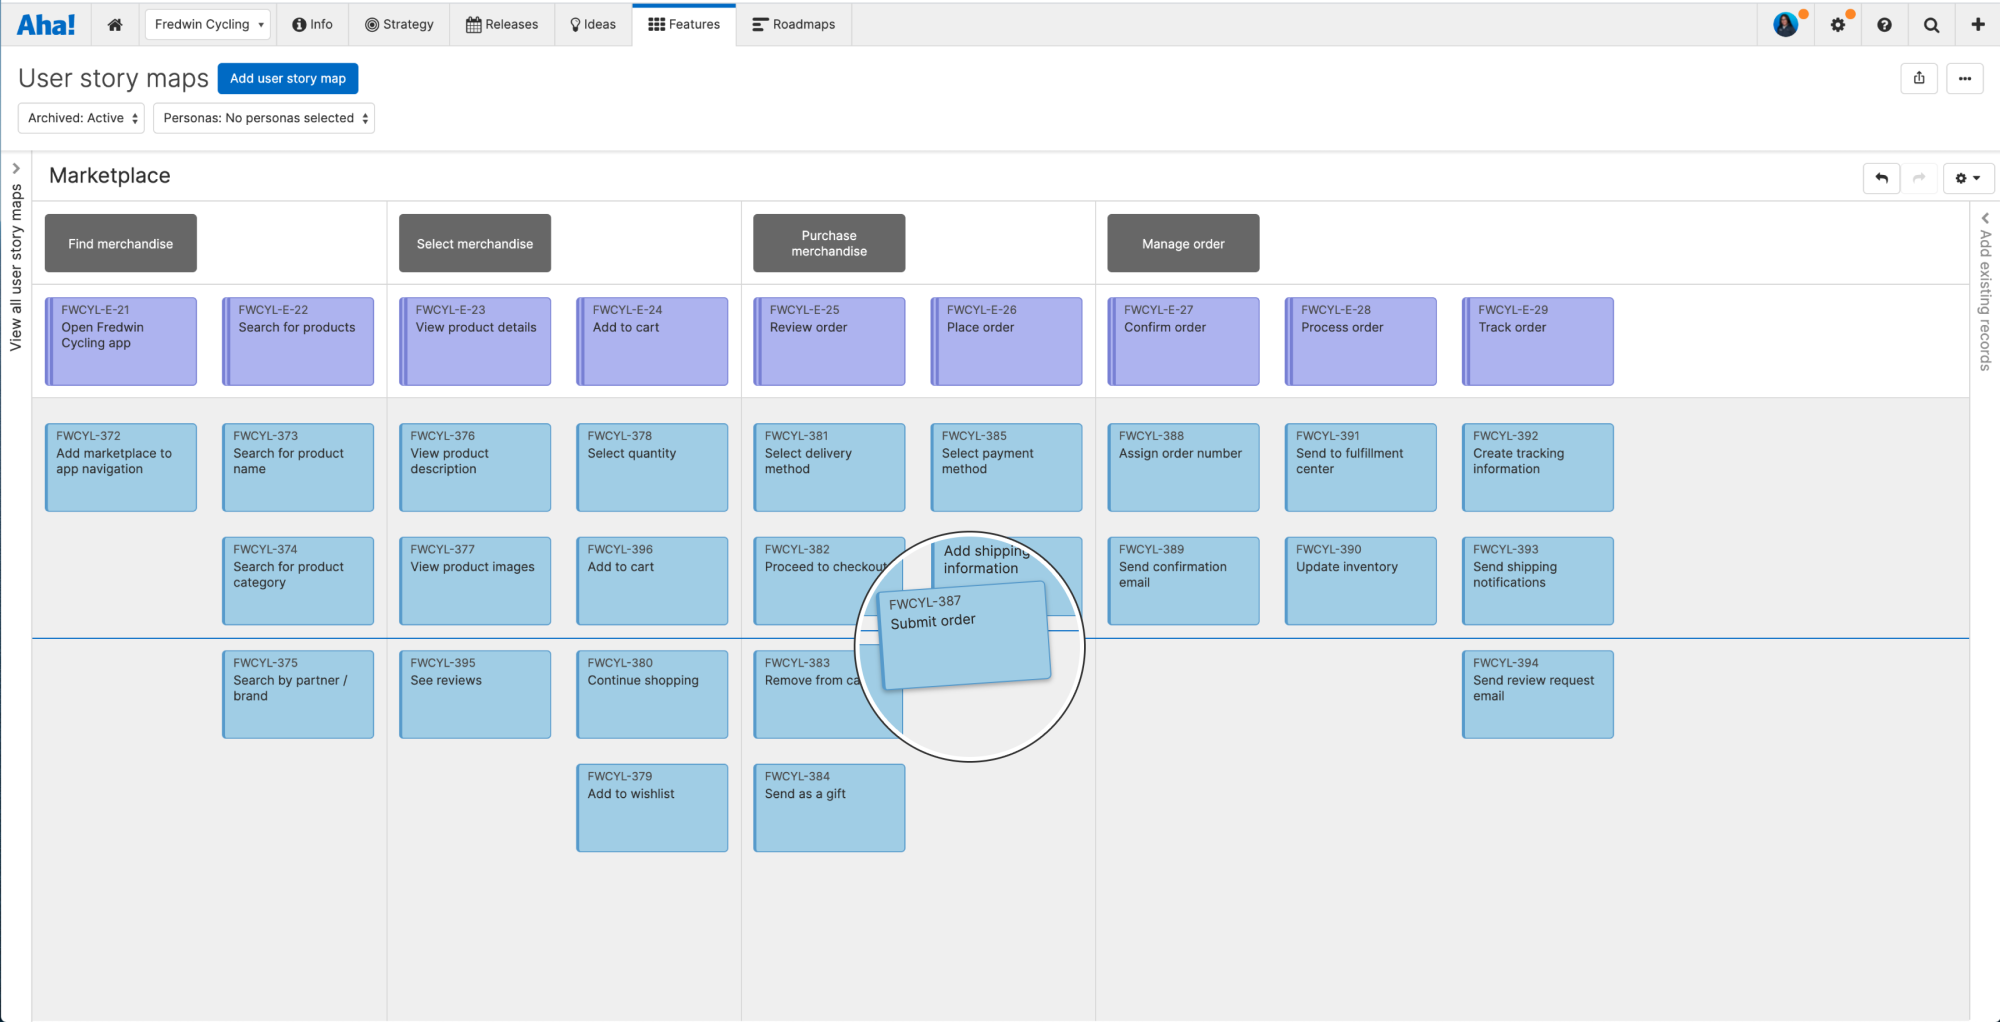 Moving features on a user story map in Aha!